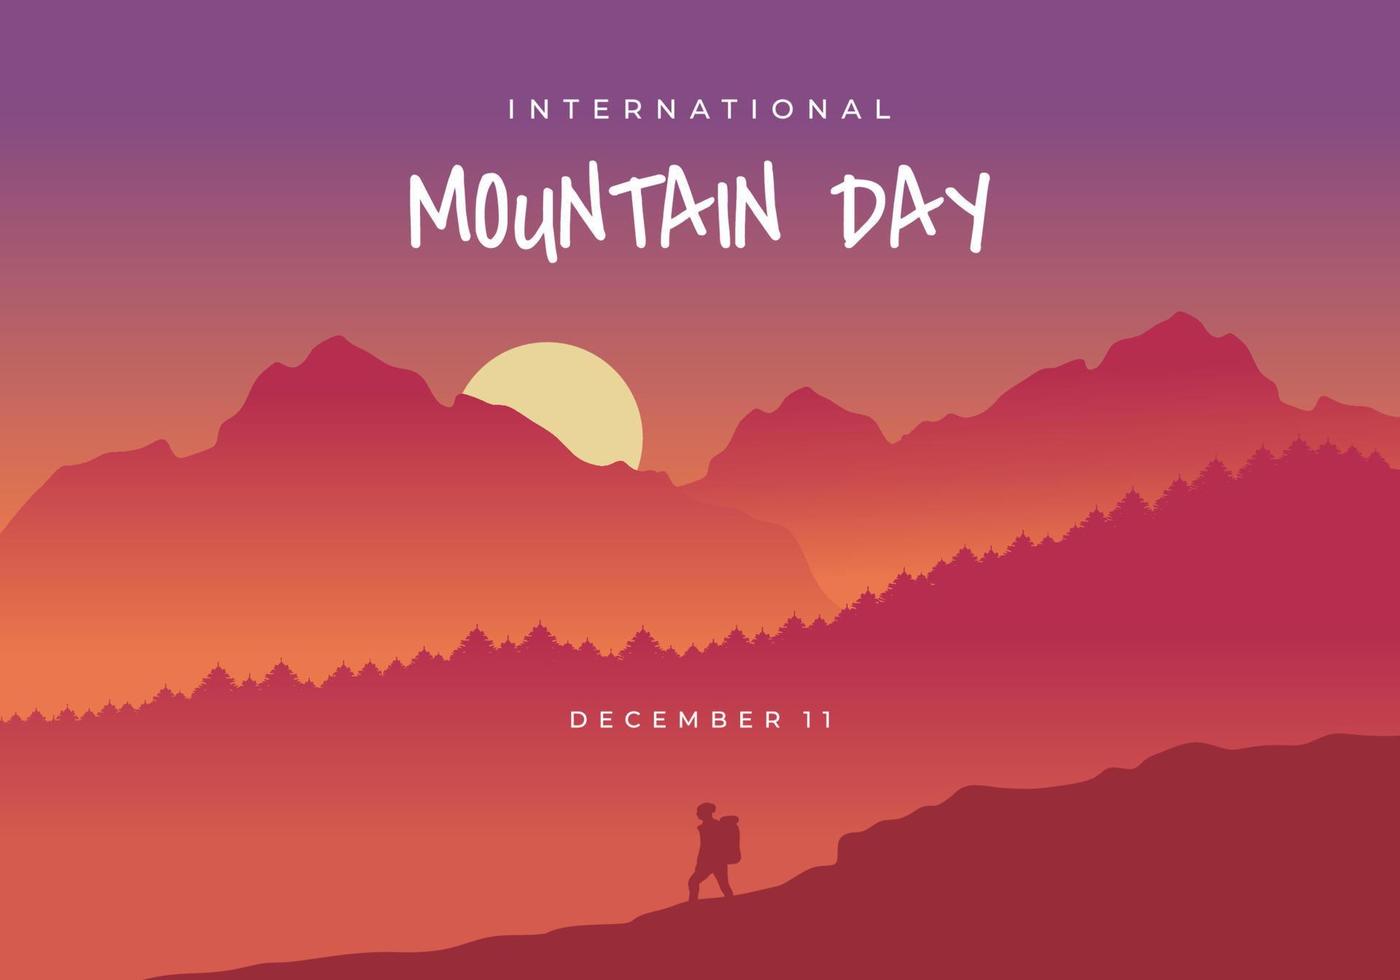 International mountain day background celebrated on december 11. vector